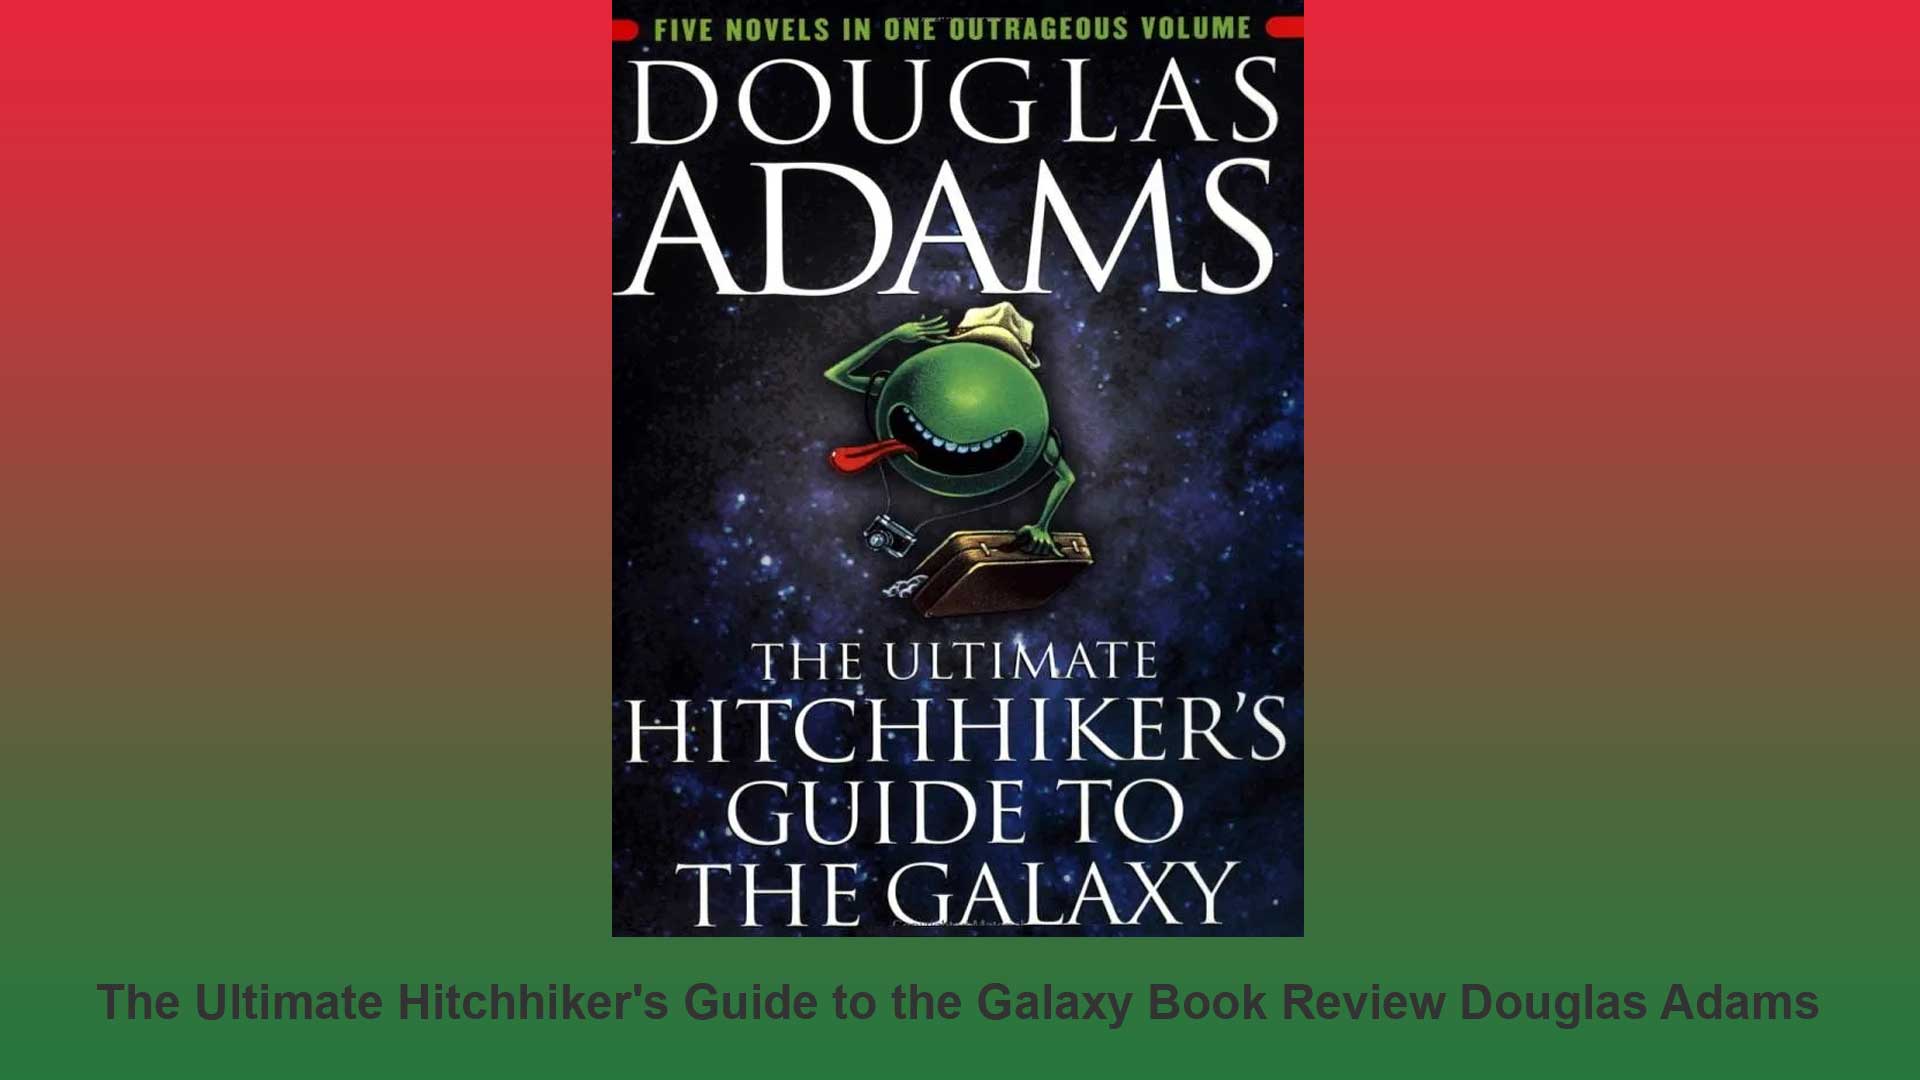 The Ultimate Hitchhiker's Guide to the Galaxy Book Review Cover Image